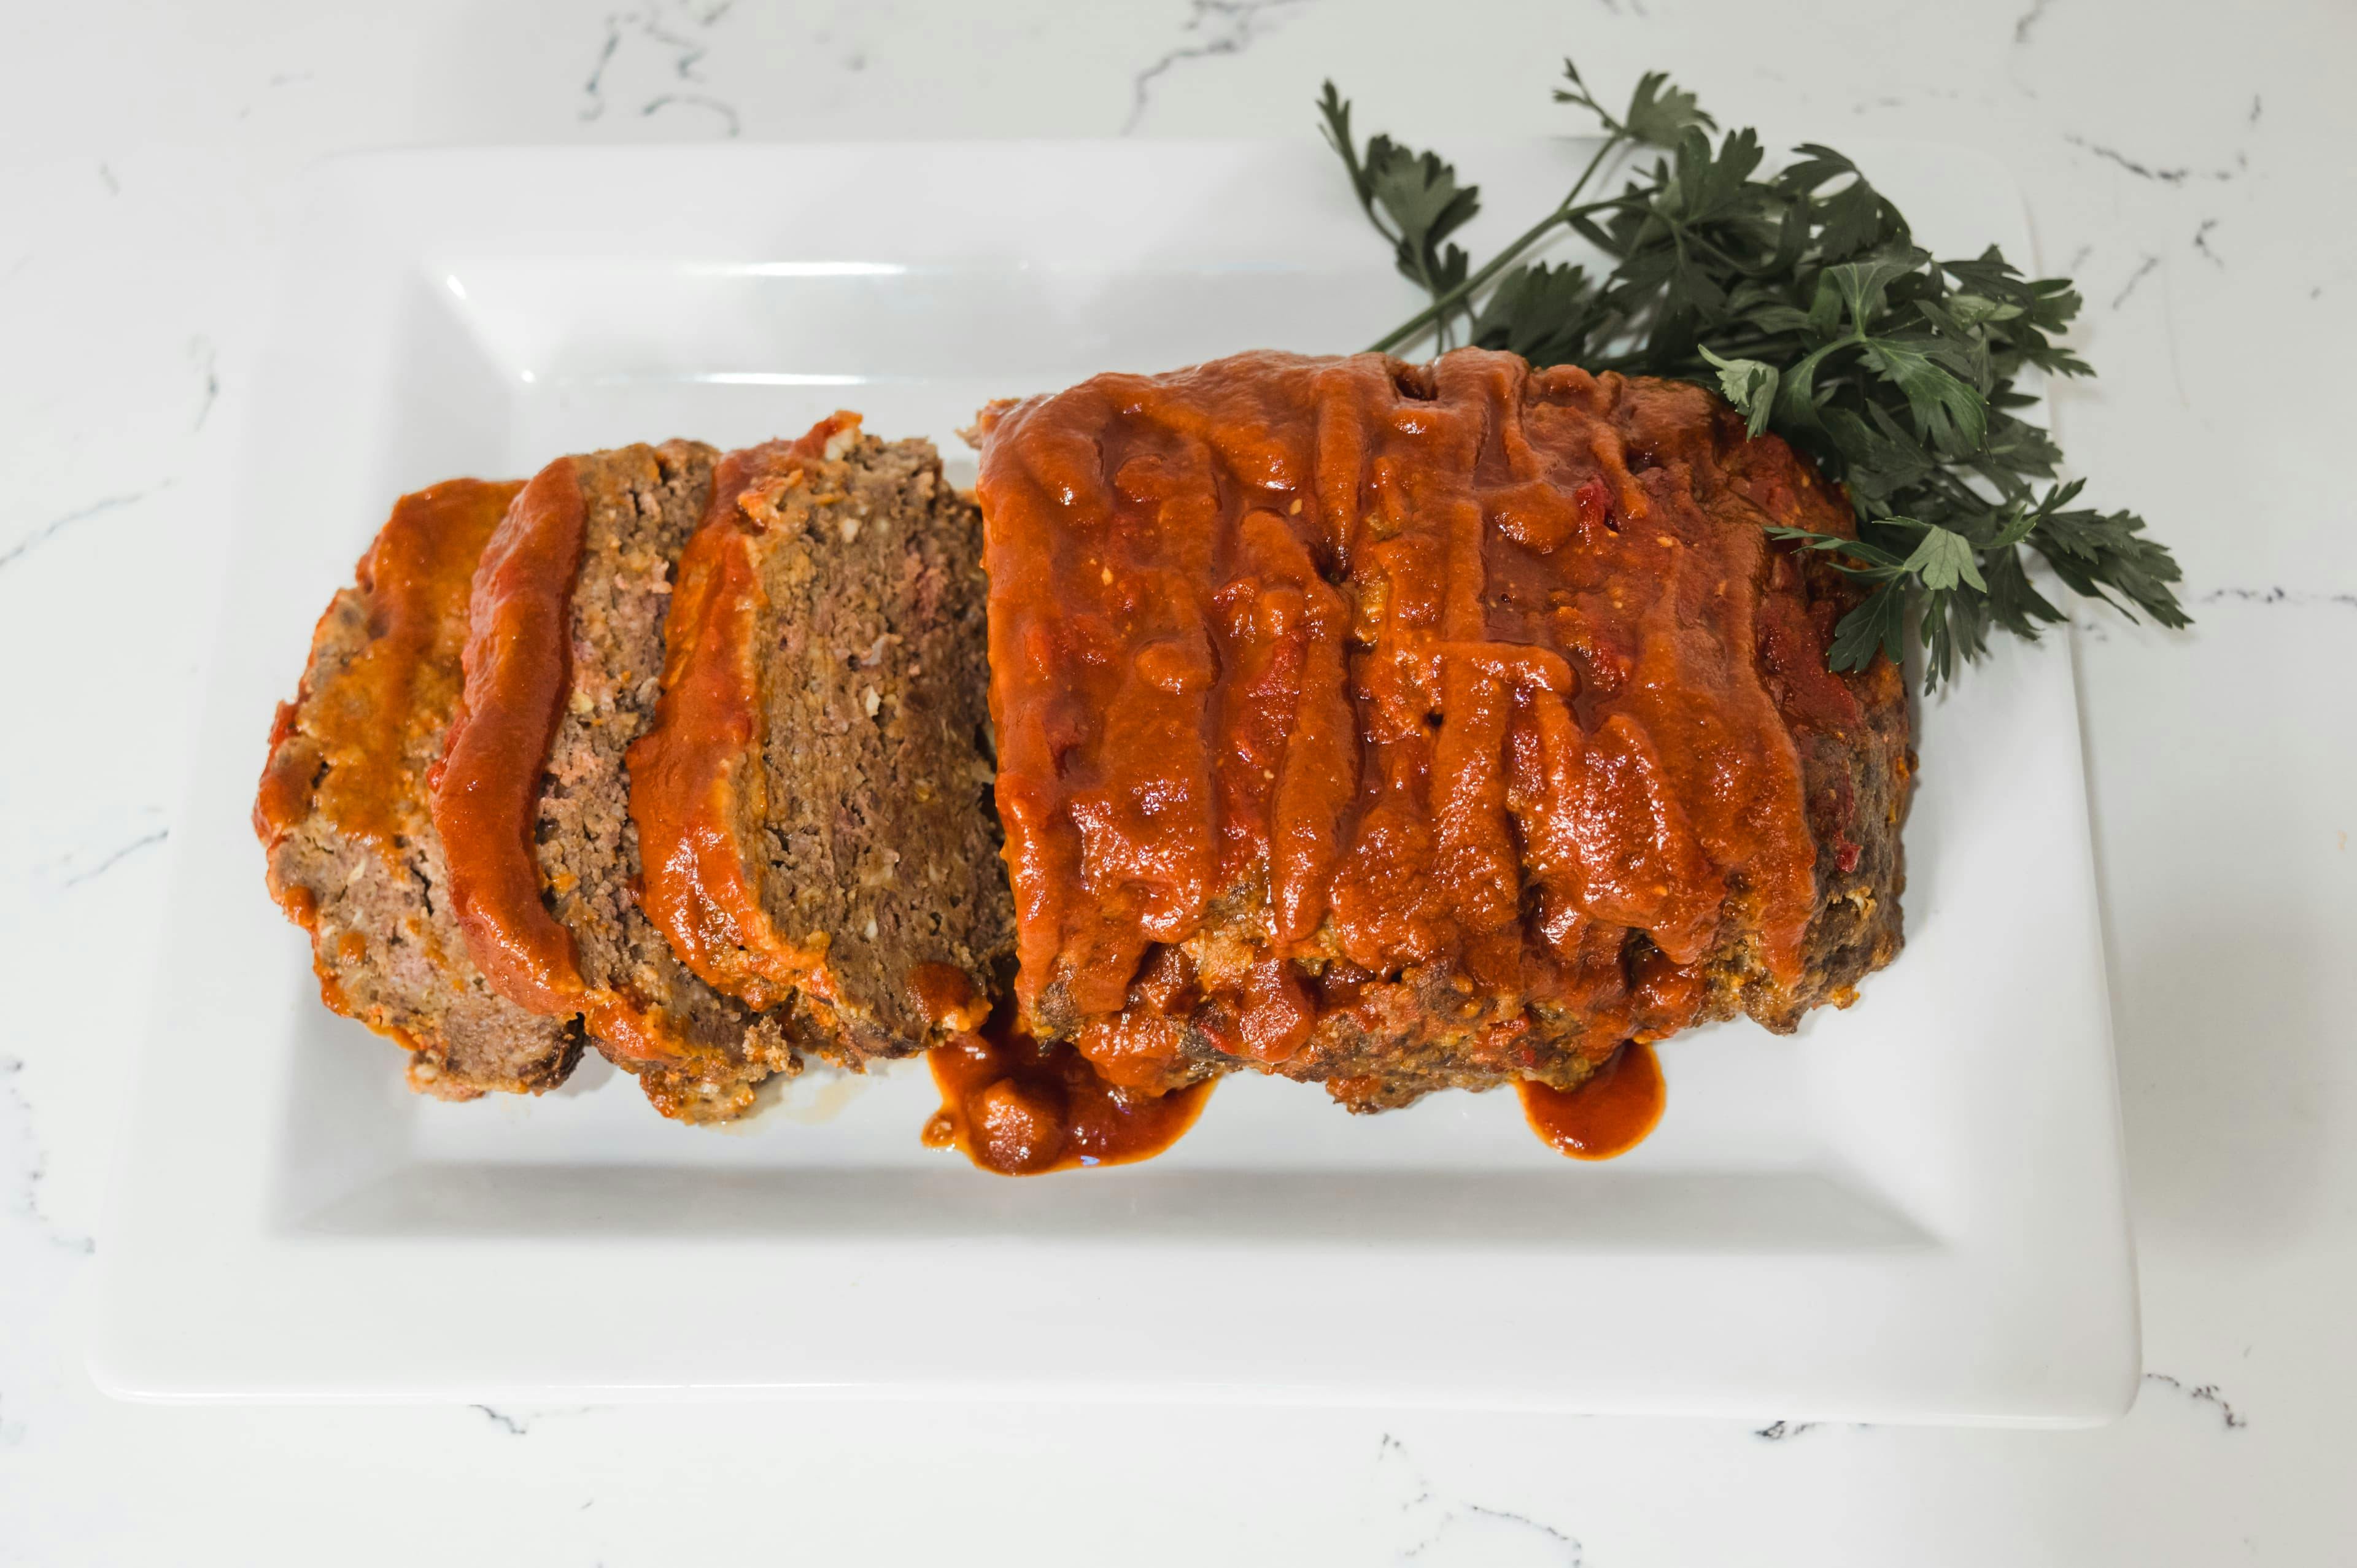 The Holly Furtick recipe: 'Grandma’s Meatloaf'